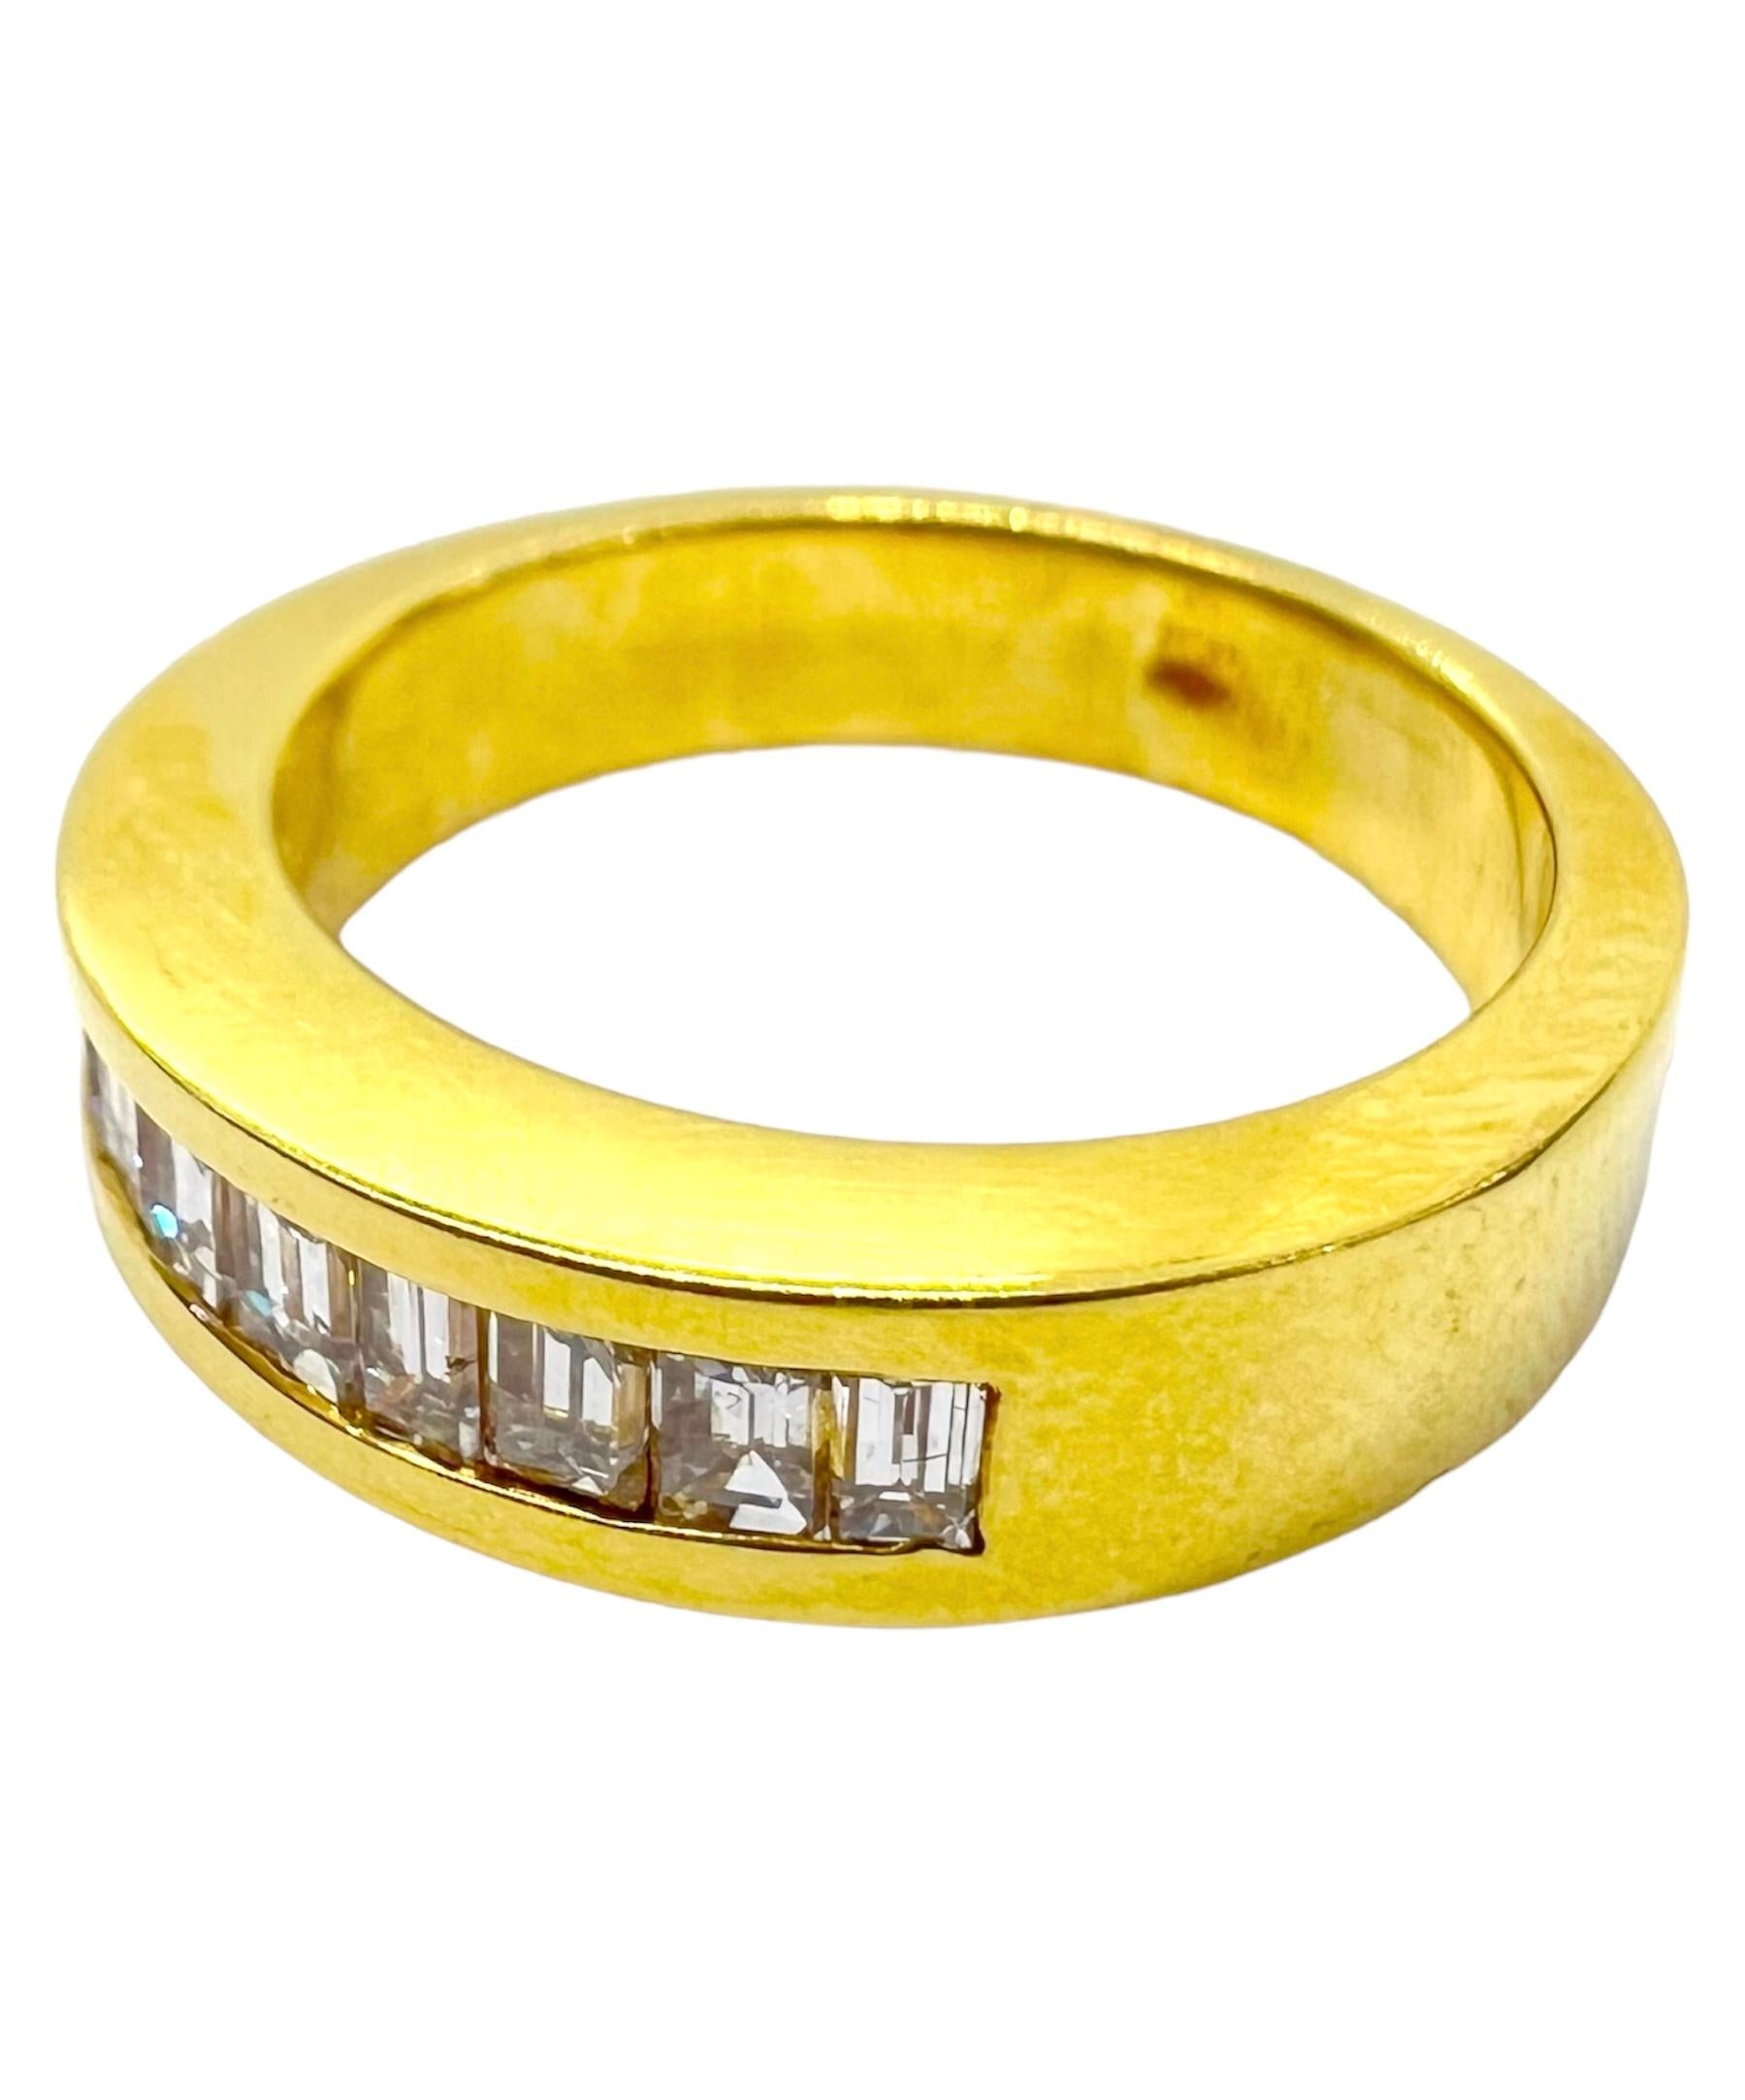 18K yellow gold band ring with emerald cut diamonds.

Sophia D by Joseph Dardashti LTD has been known worldwide for 35 years and are inspired by classic Art Deco design that merges with modern manufacturing techniques.